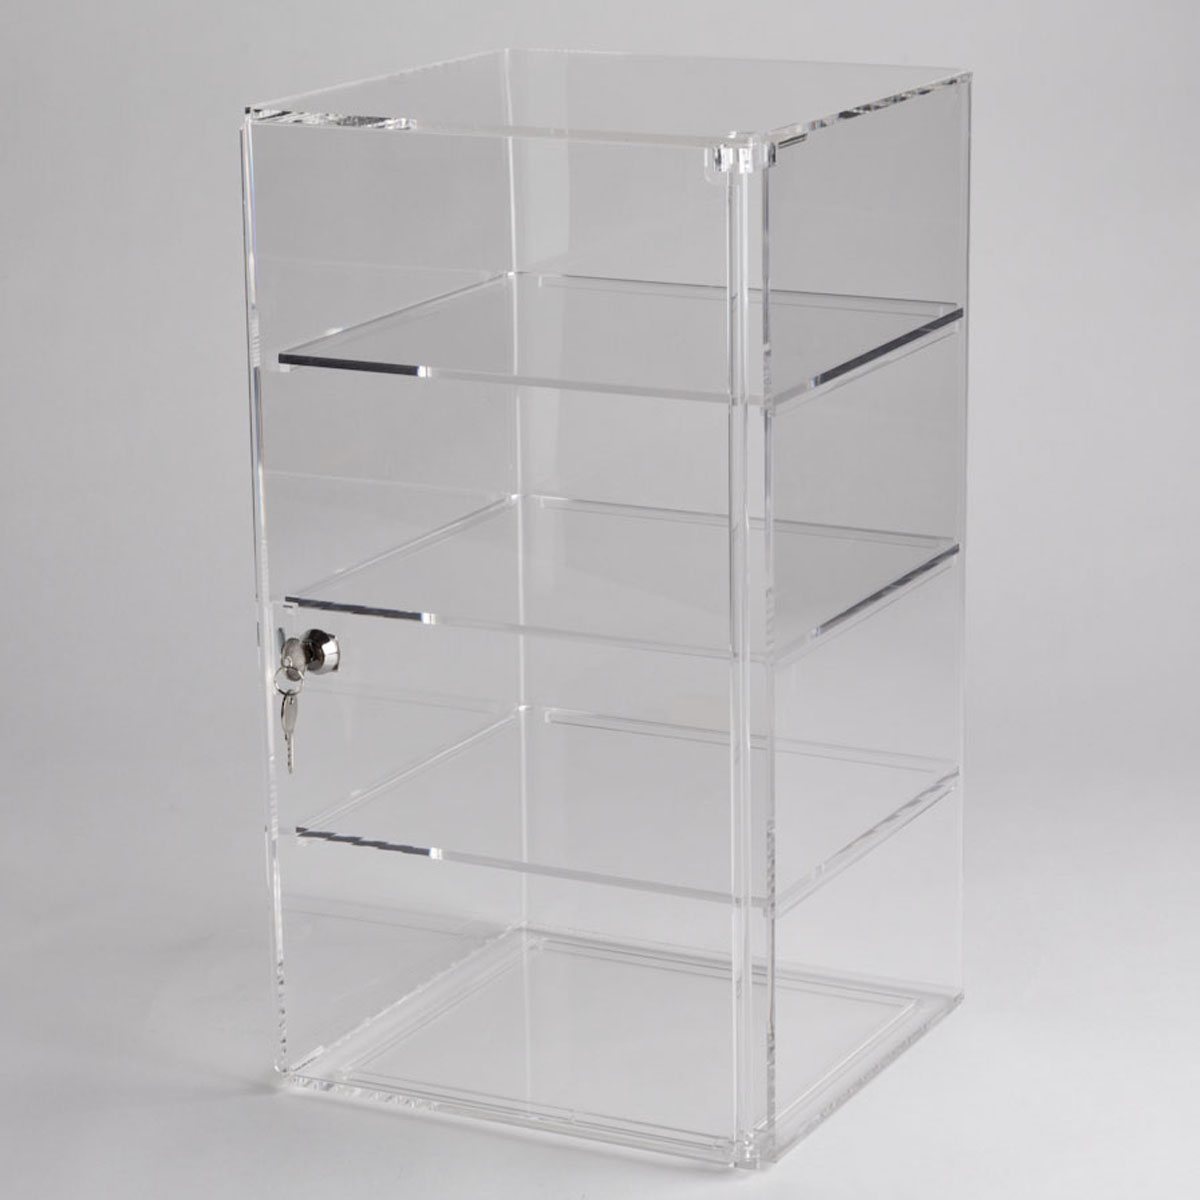 Acrylic Display Case 12" x 7"x 20.5" tall  Convenience Store Counter Top Display 